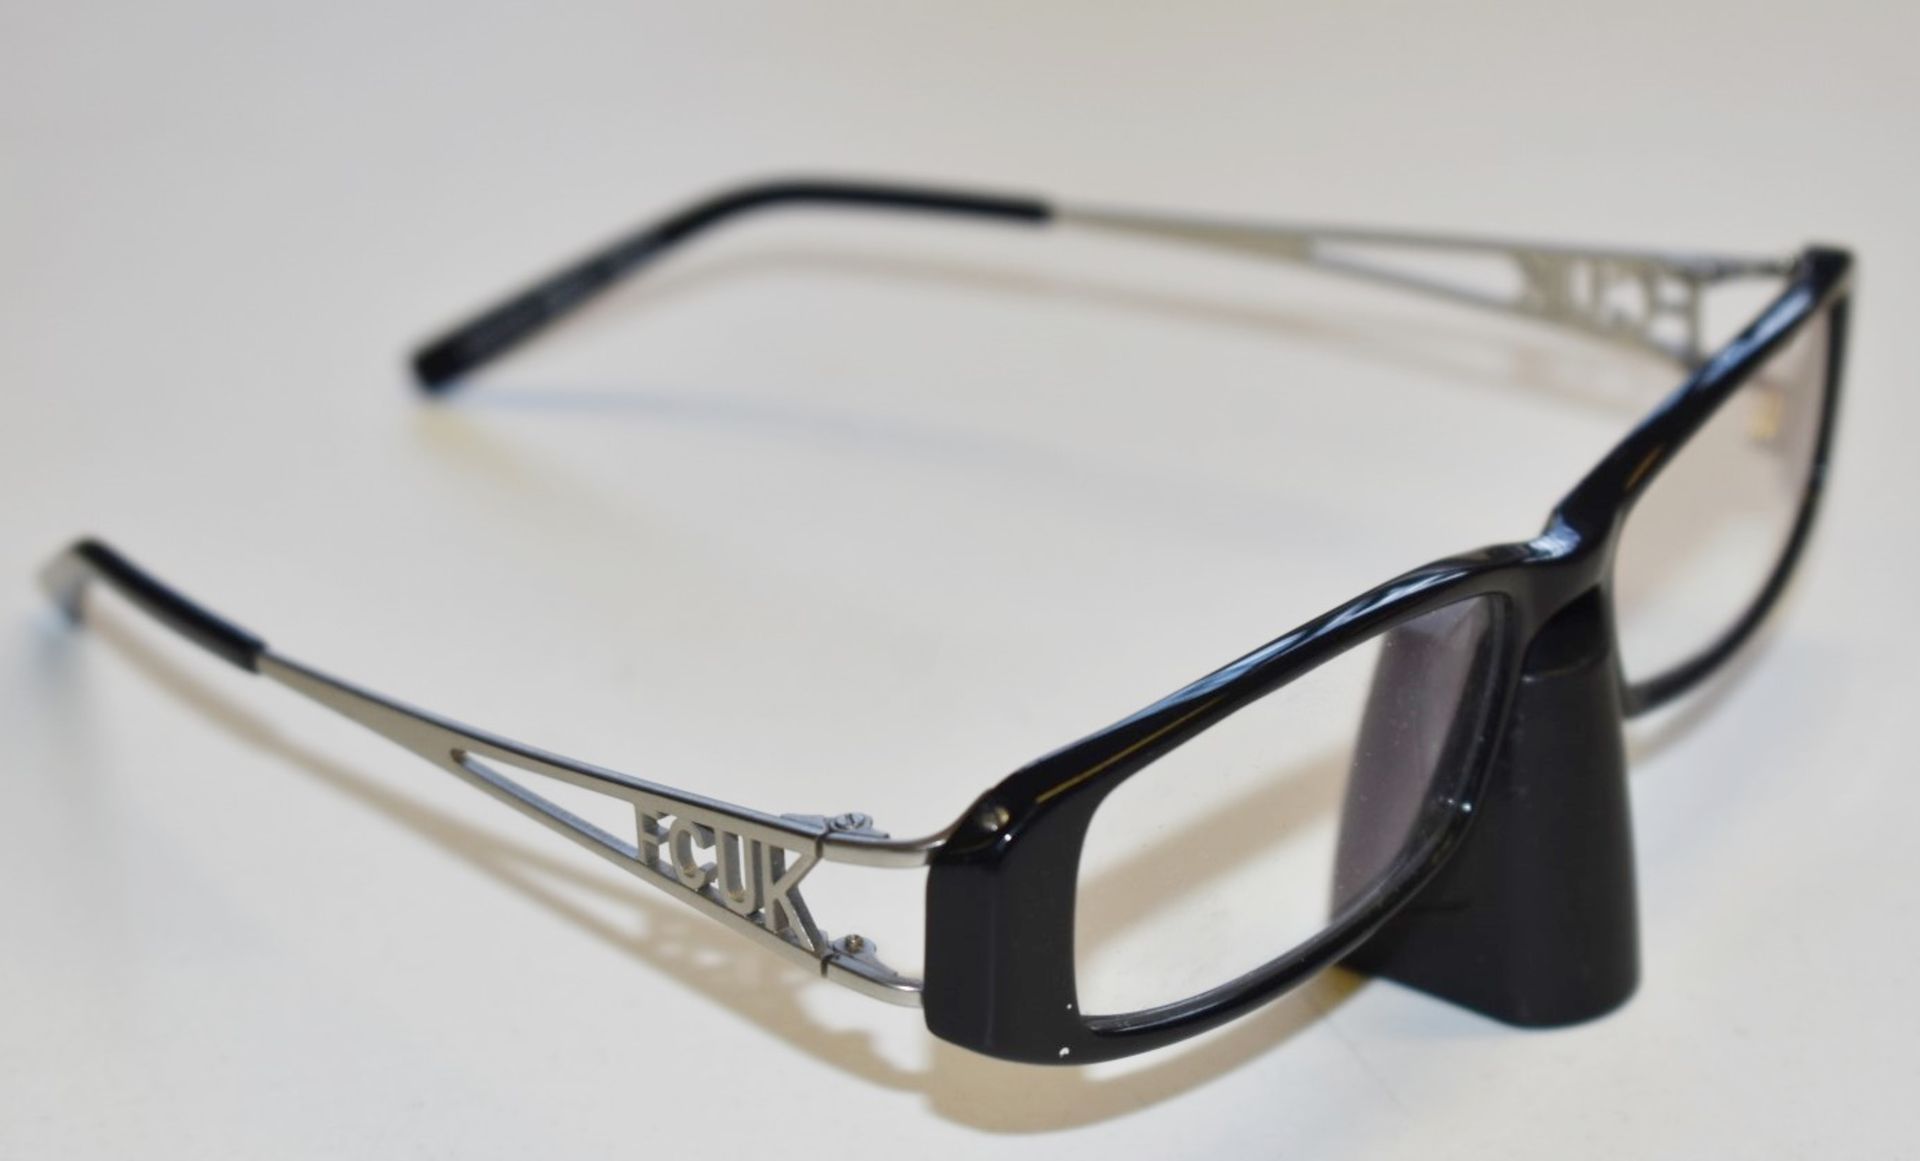 1 x Genuine FCUK Spectacle Eye Glasses Frame - Ex Display Stock  - Ref: GTI176 - CL645 - Location: